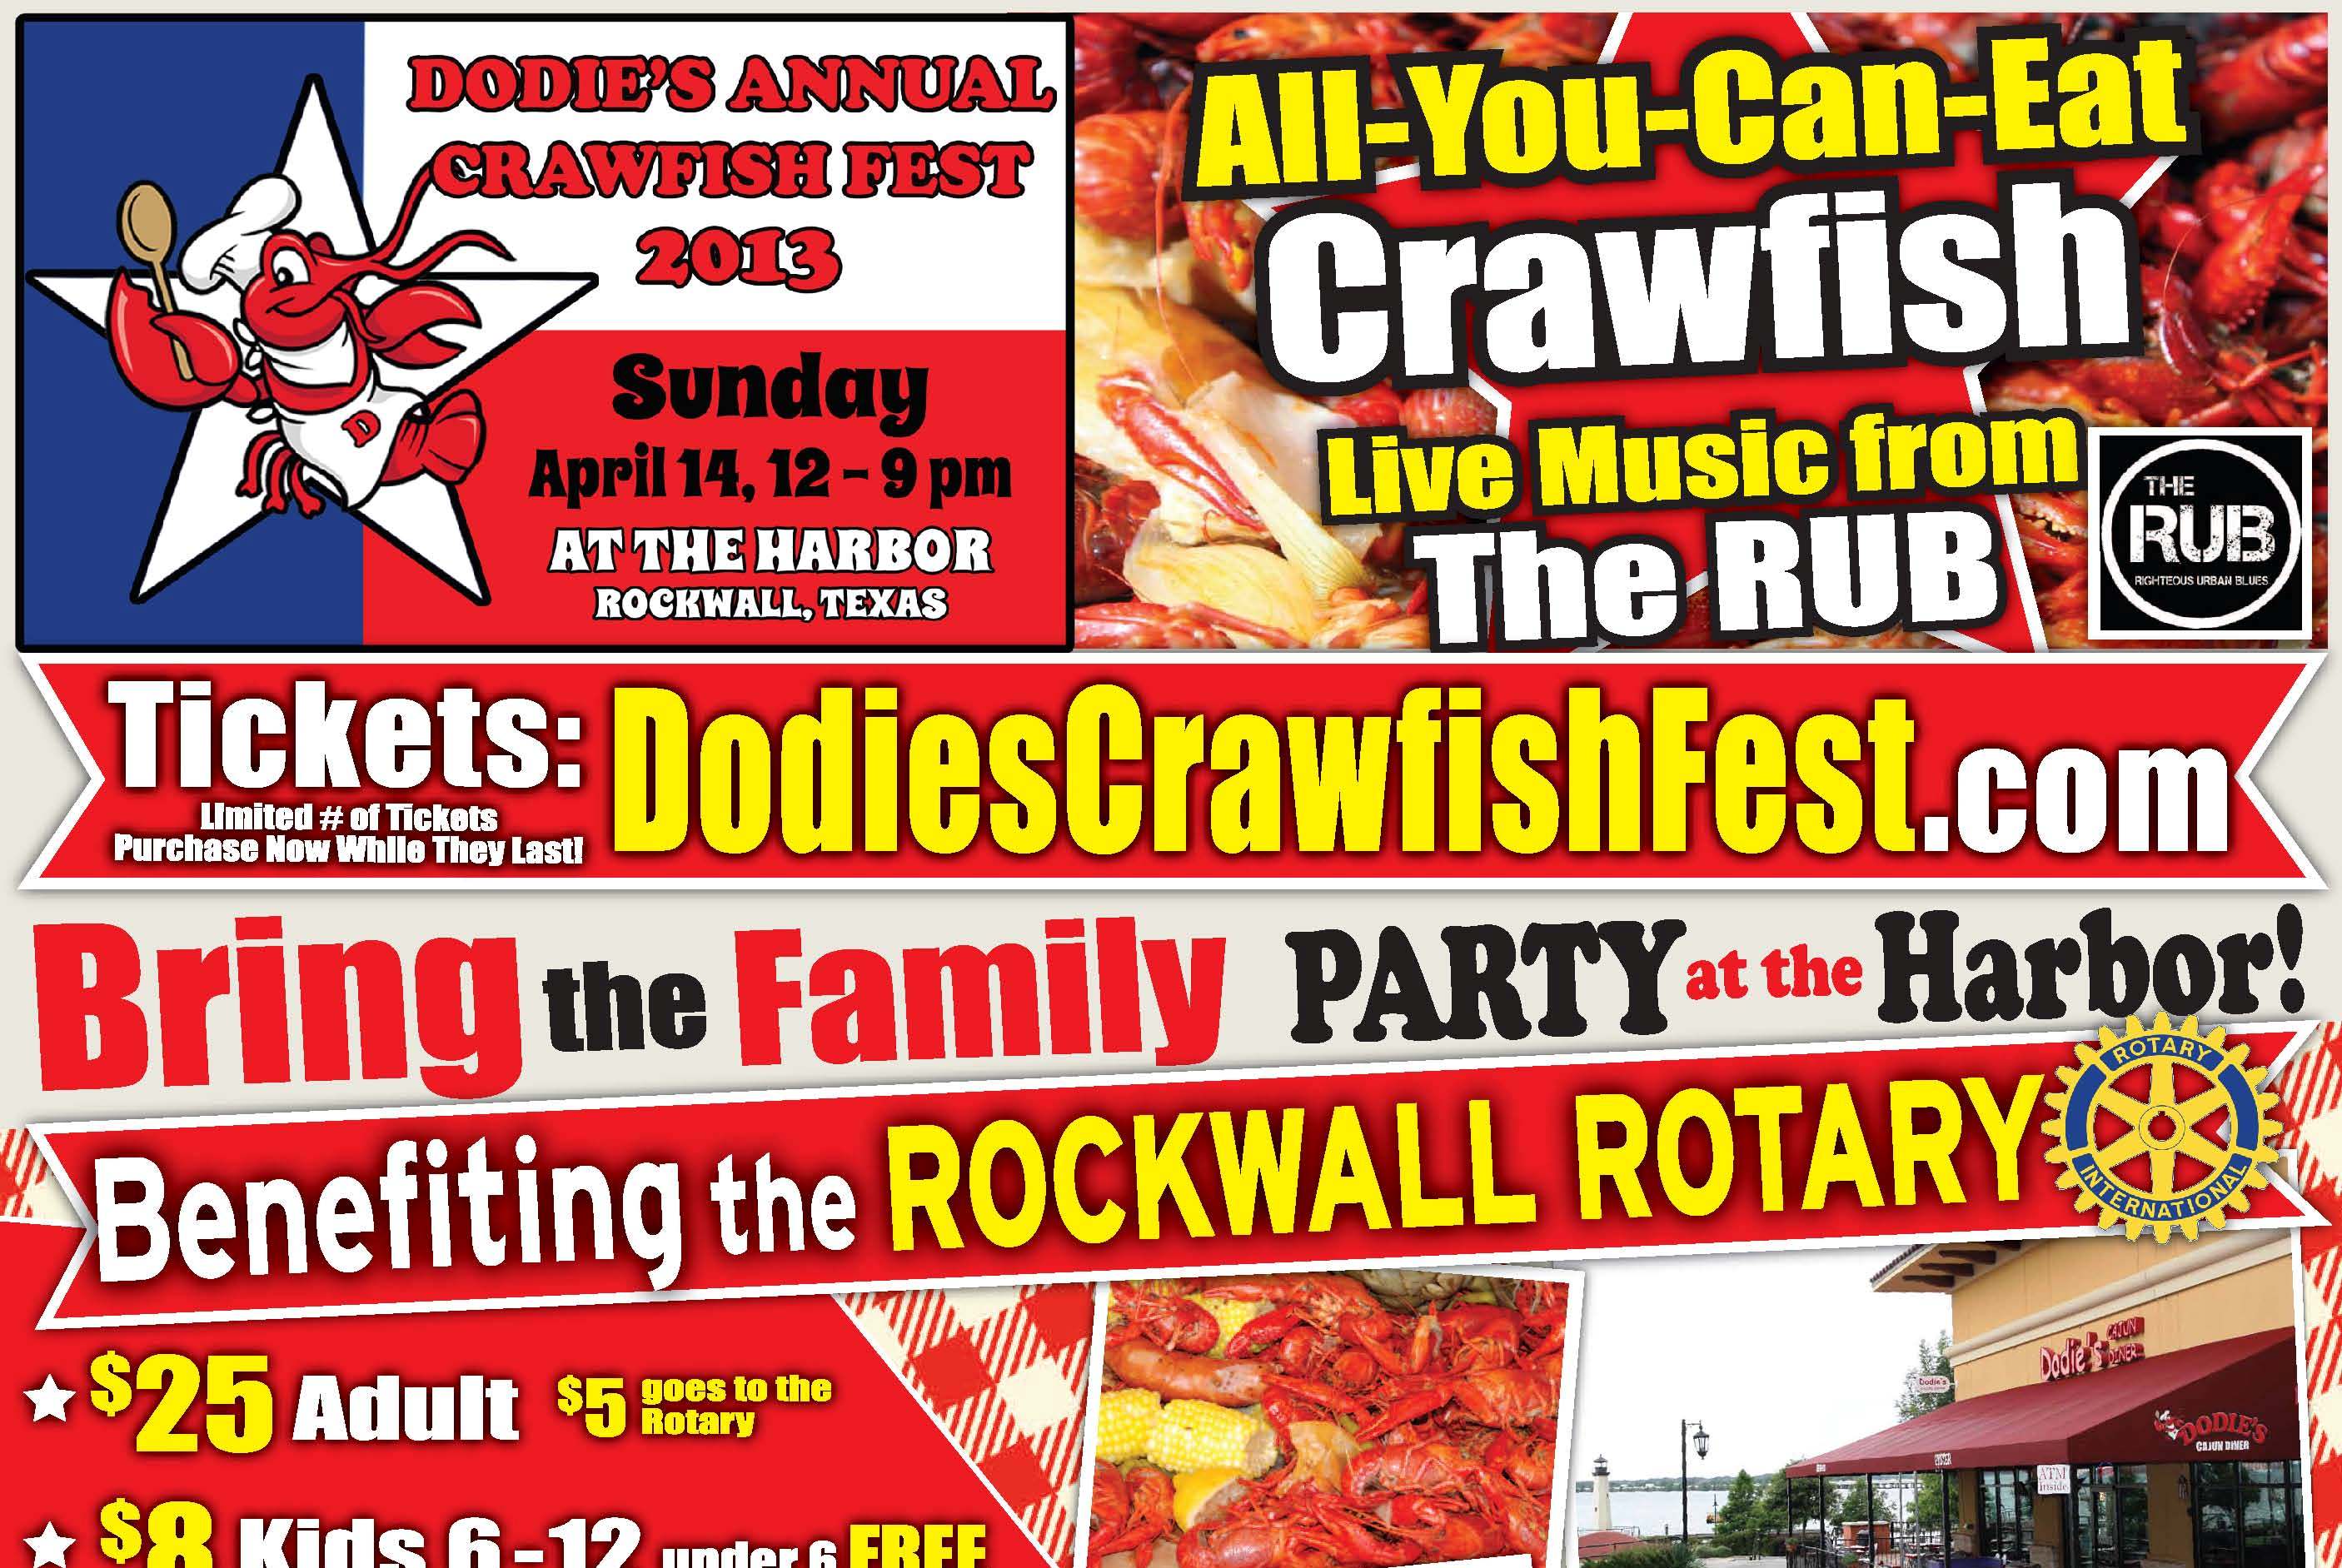 All-you-can-eat Crawfish Fest at The Harbor Sunday